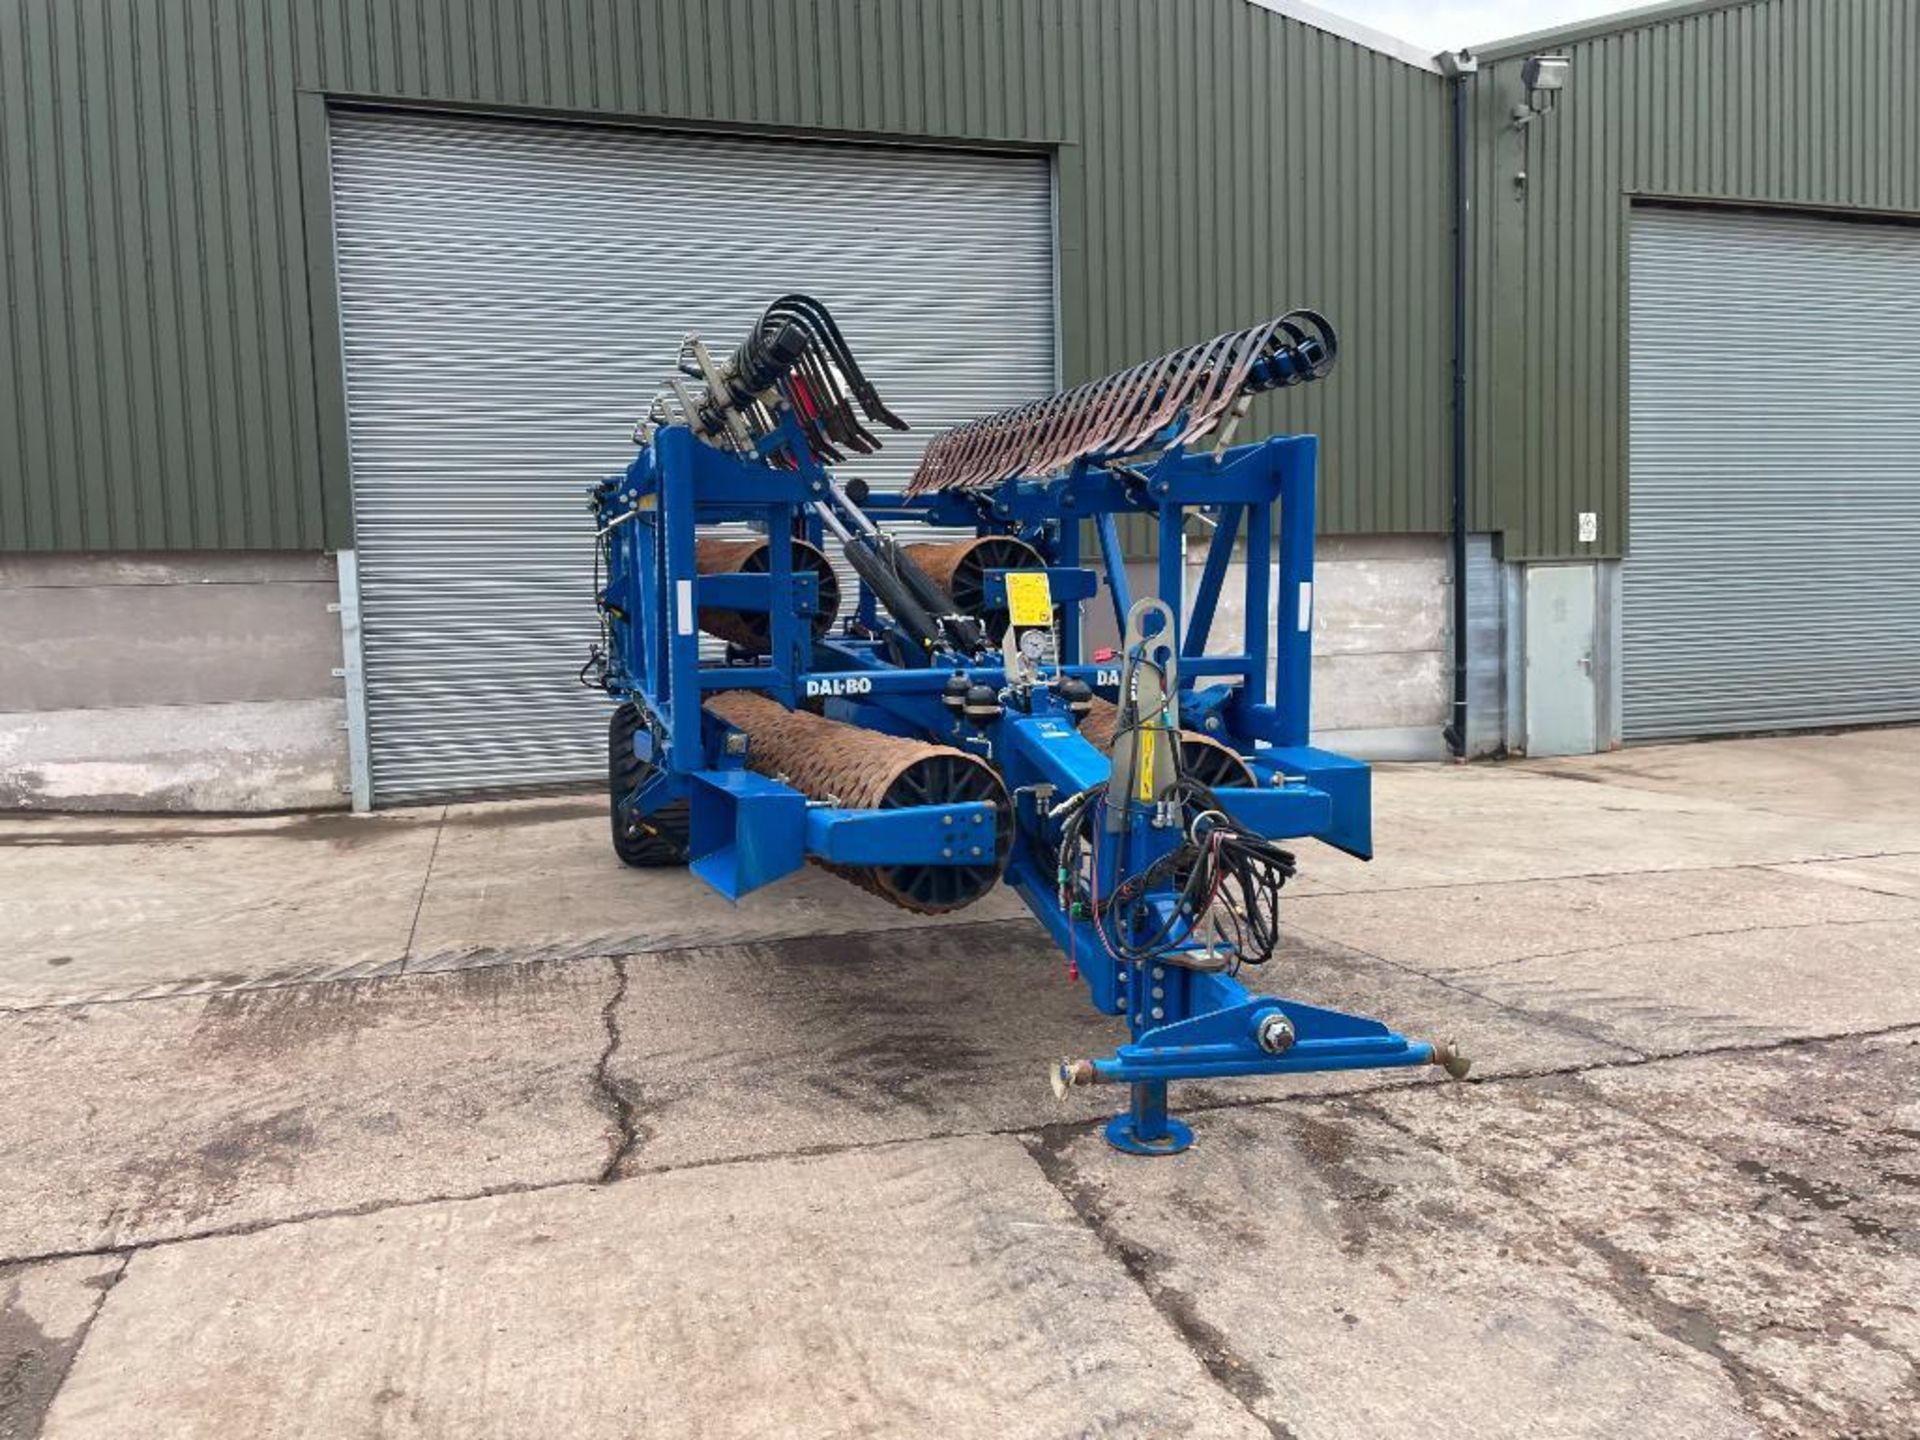 2015 Dalbo MaxiRoll 1230 12.3m trailed hydraulic folding Cambridge rolls with levelling boards and S - Image 3 of 15